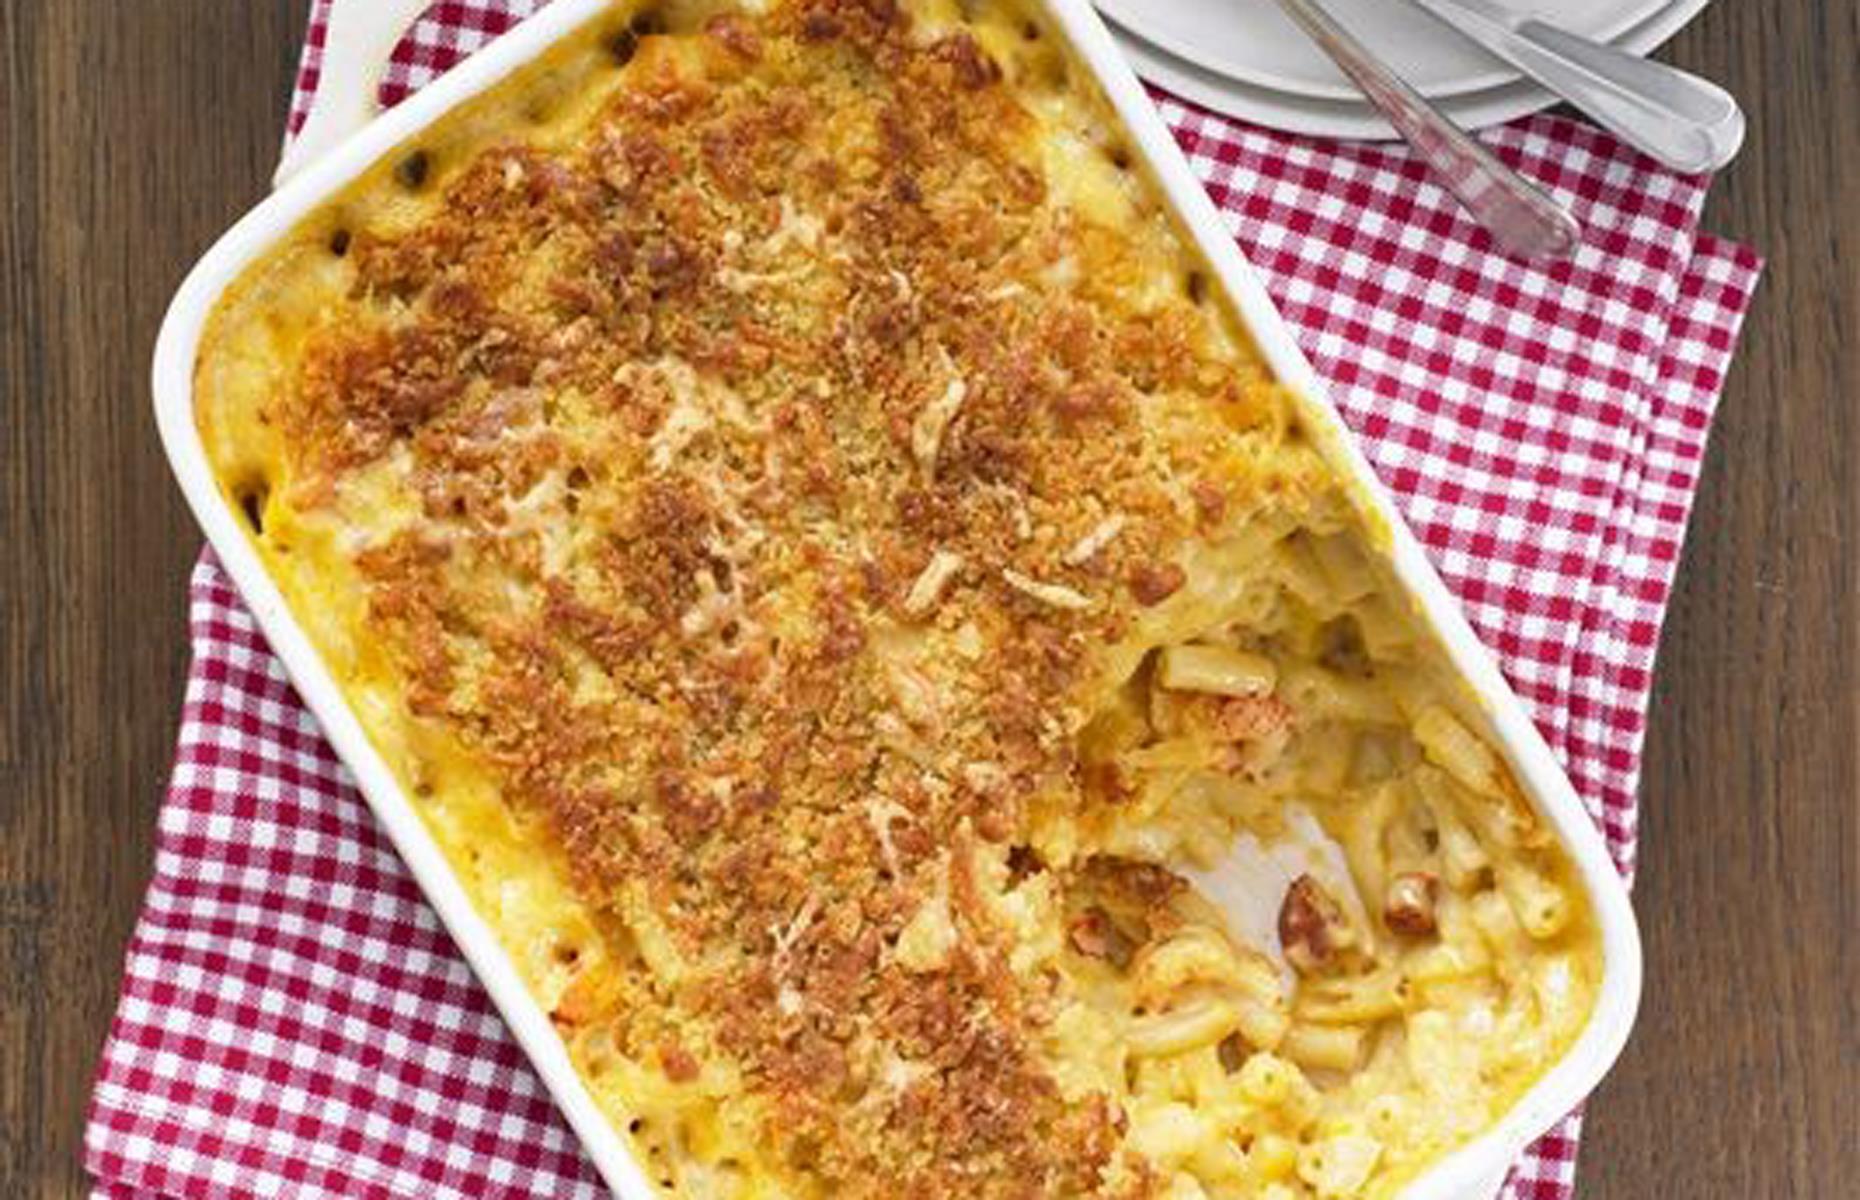 <p>For an even more indulgent dish, incorporate ham, lardons, bacon or pancetta into the mix. If you’re feeling really decadent, grate truffle over the top or add luxurious seafood, like lobster tails, crayfish or crab.</p>  <p><a href="https://www.lovefood.com/recipes/59996/the-hairy-bikers-crayfish-macaroni-cheese-recipe"><strong>Get the recipe for crayfish mac 'n' cheese here</strong></a></p>